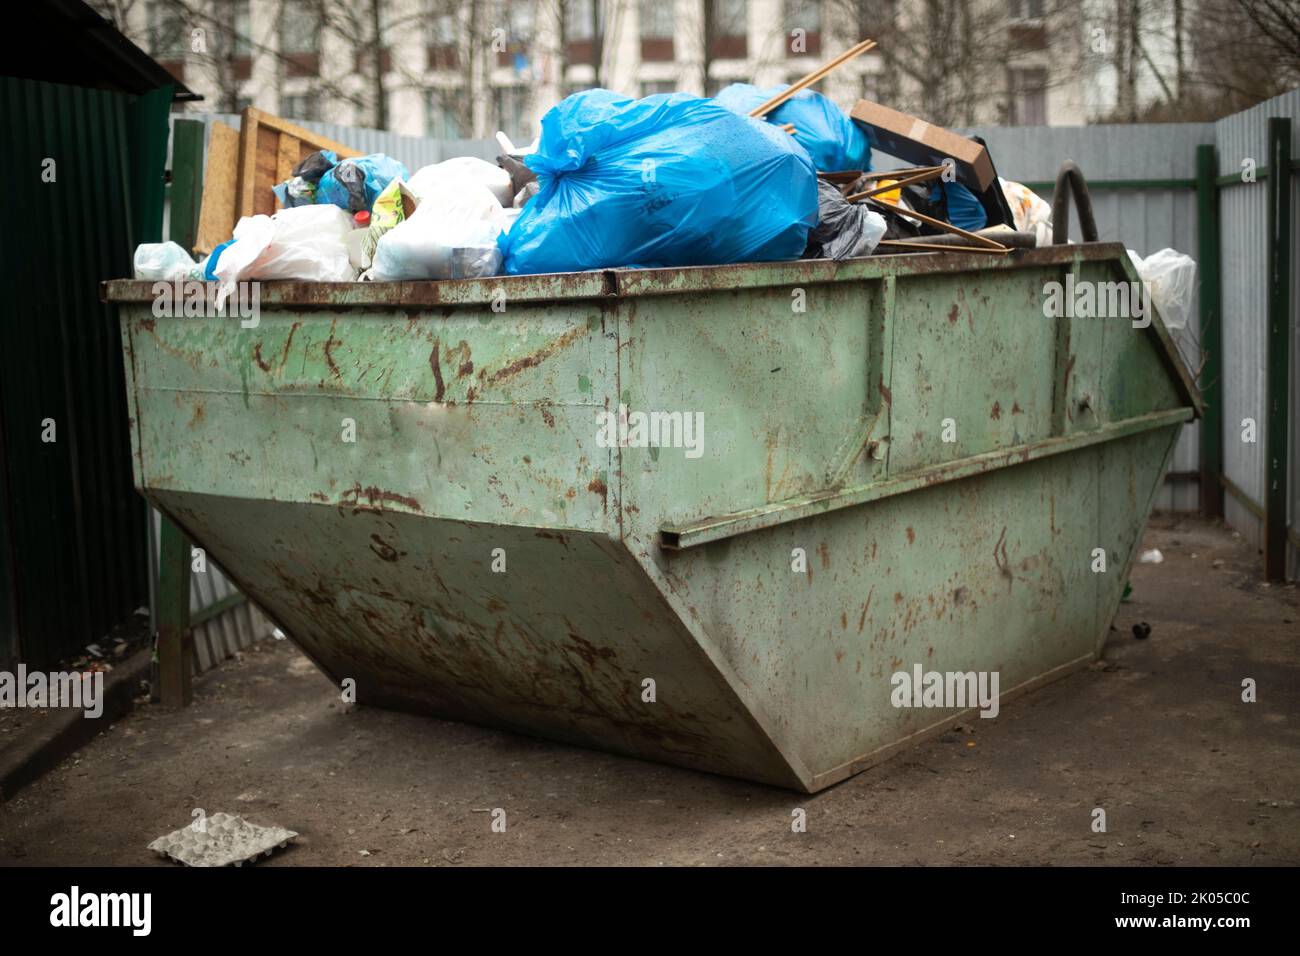 Garbage can. Waste container. City dump. Garbage collection in city. Stock Photo